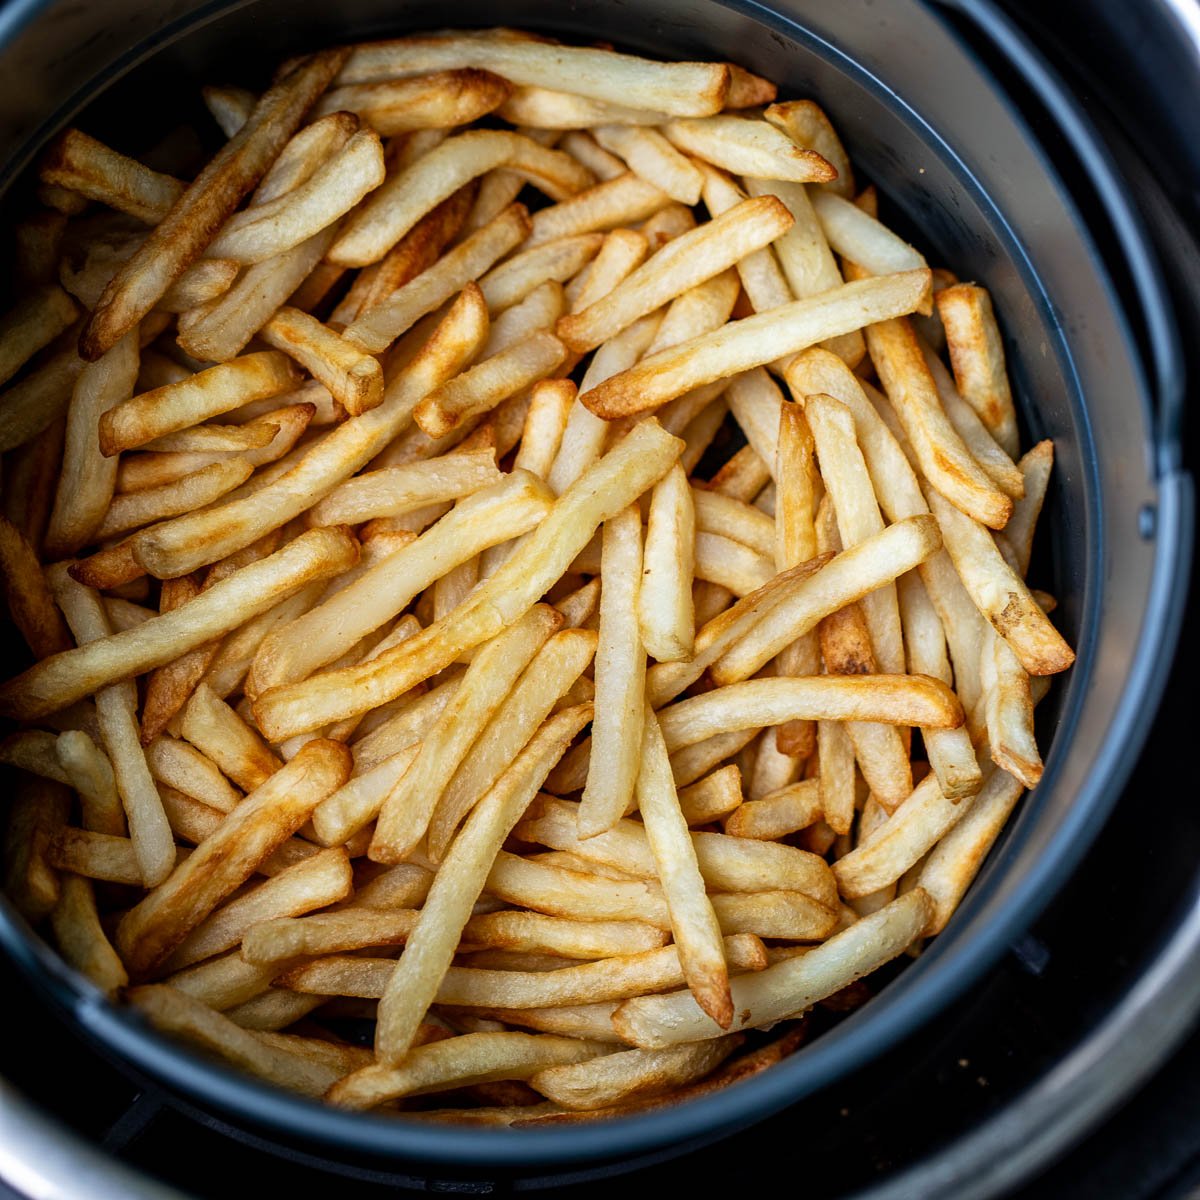 Square image of frozen fries cooked in air fryer.